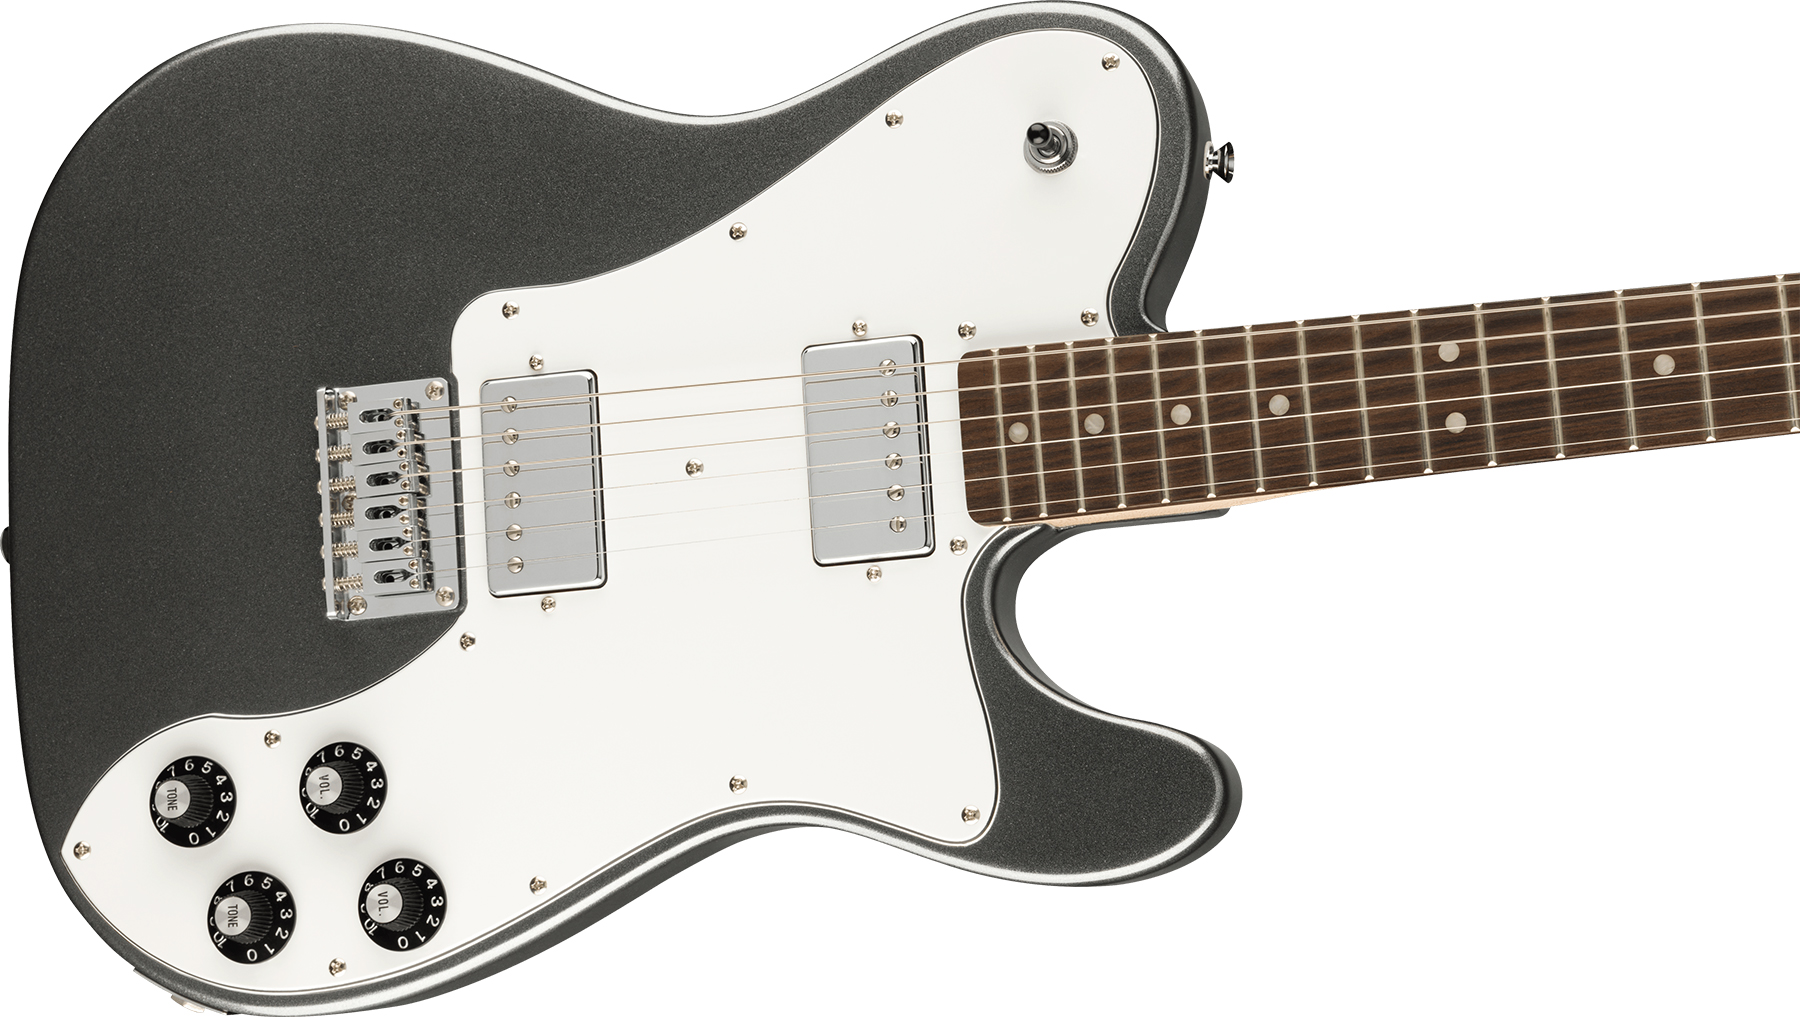 Squier Tele Affinity Deluxe 2021 Hh Ht Lau - Charcoal Frost Metallic - Tel shape electric guitar - Variation 2